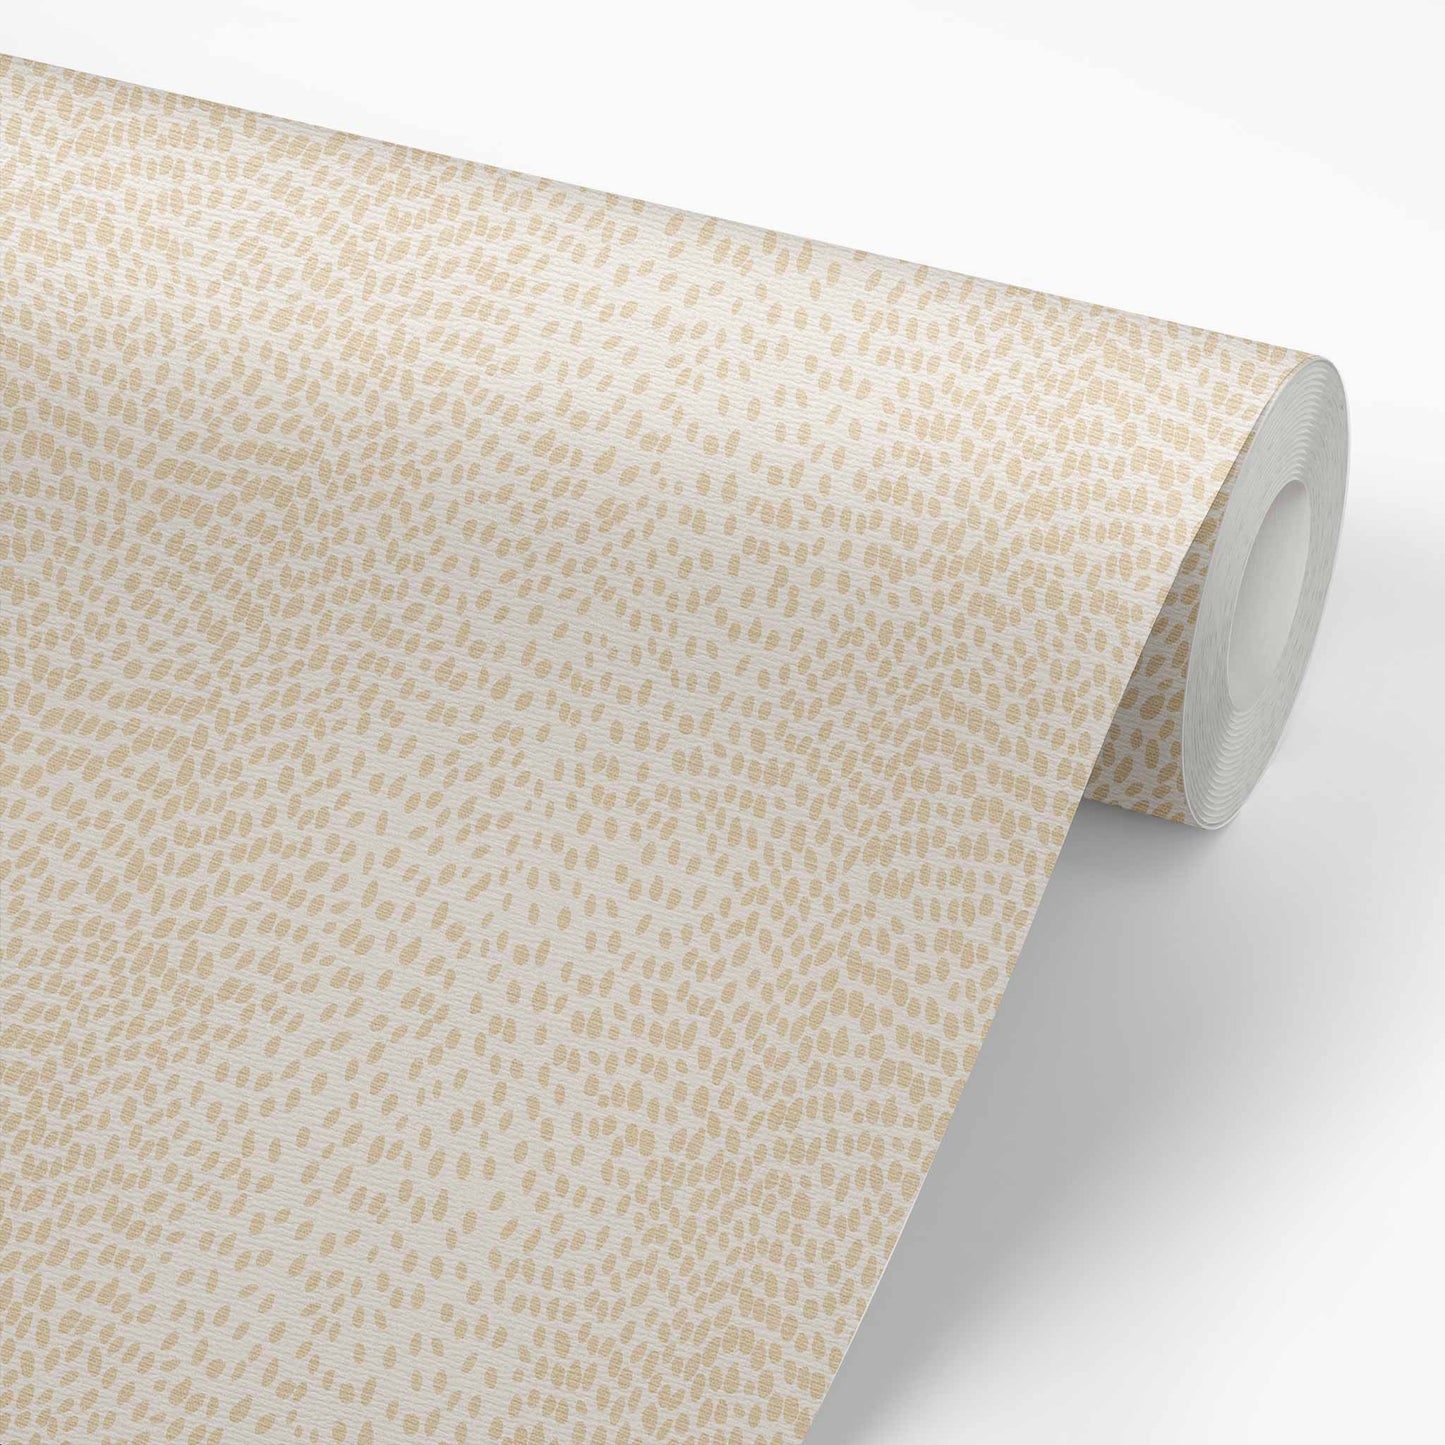 Leopard cream wall treatment looks great in offices, bedrooms, and nurseries.